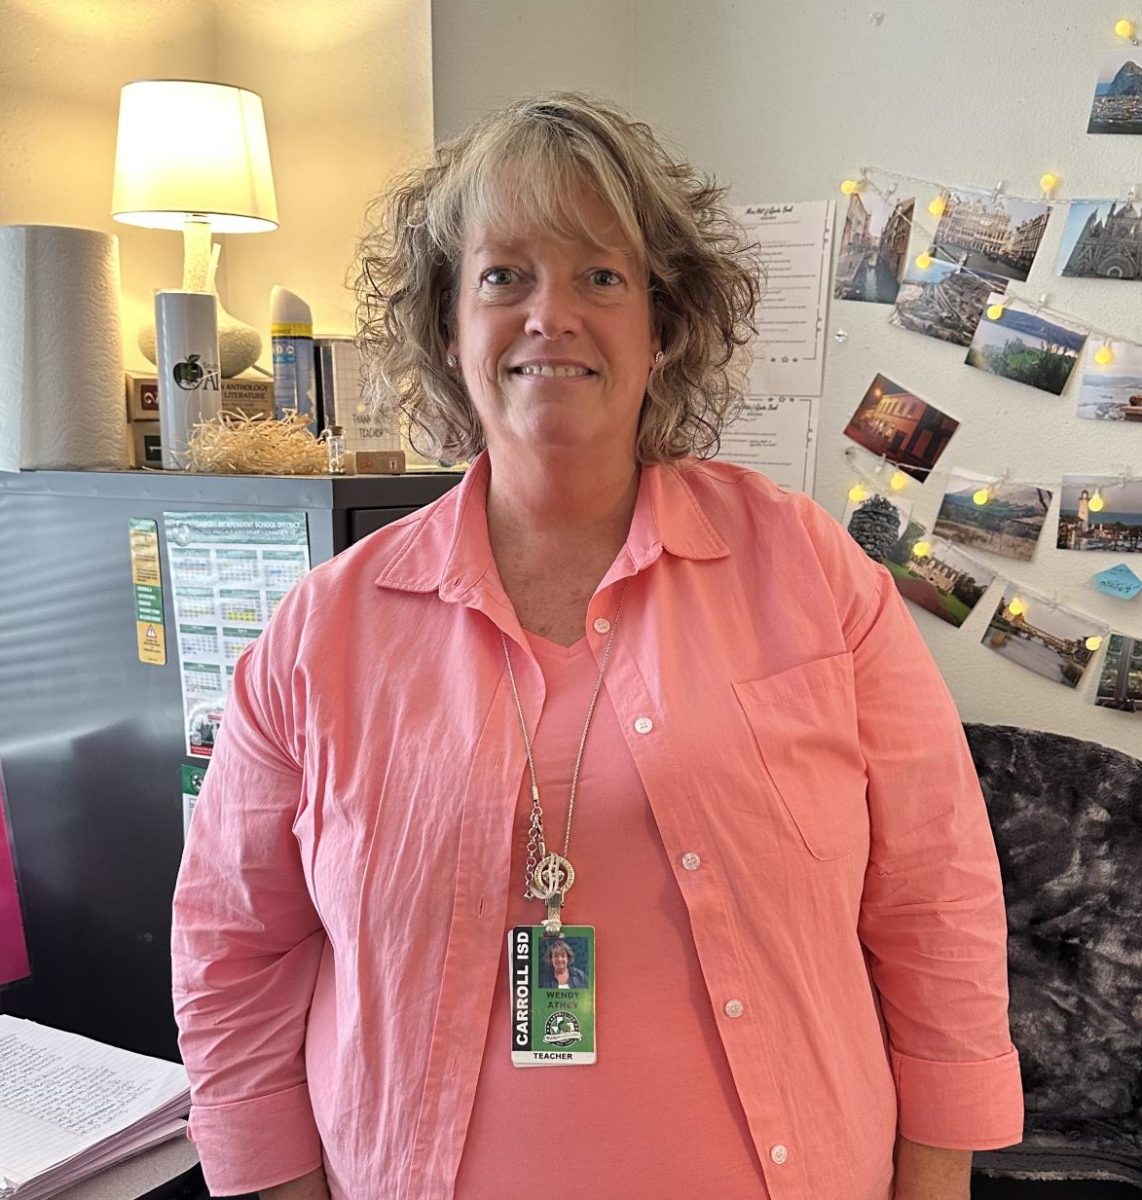 From the States to Europe and back: Mrs. Wendy Athey’s teaching journey